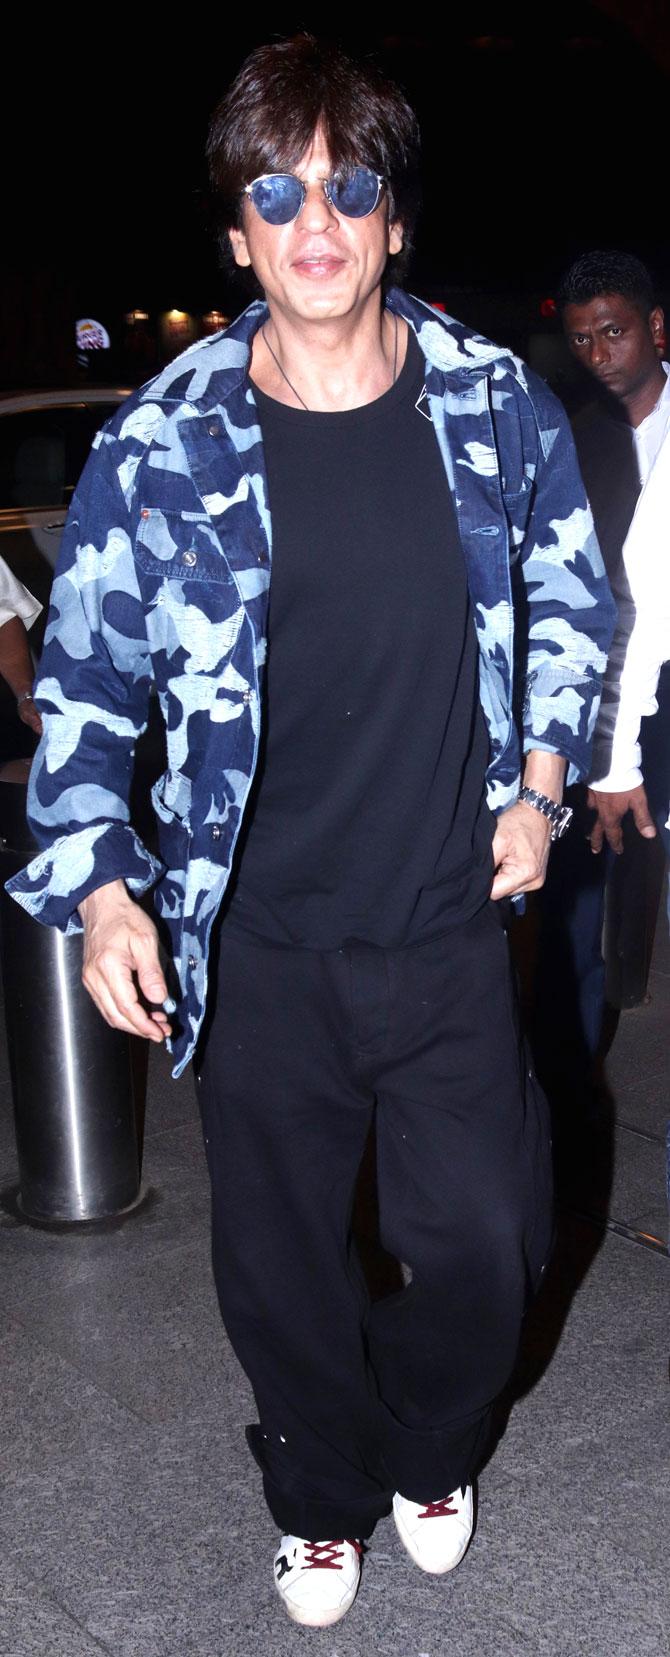 Shah Rukh Khan was also spotted at the Mumbai airport. SRK wore a camo printed jacket and black tee and black track pants. Recently, SRK completed 27 years in Indian Cinema. Shah Rukh Khan paved his way into the industry with 'Deewana' in 1992 which was a stupendous success at the box office and also won him the Filmfare Best Male Debut Award for his performance. Basking in the success of his film, the actor has travelled miles by beginning the career in acting with theatre in Delhi where he grew up before he moved to television with shows like 